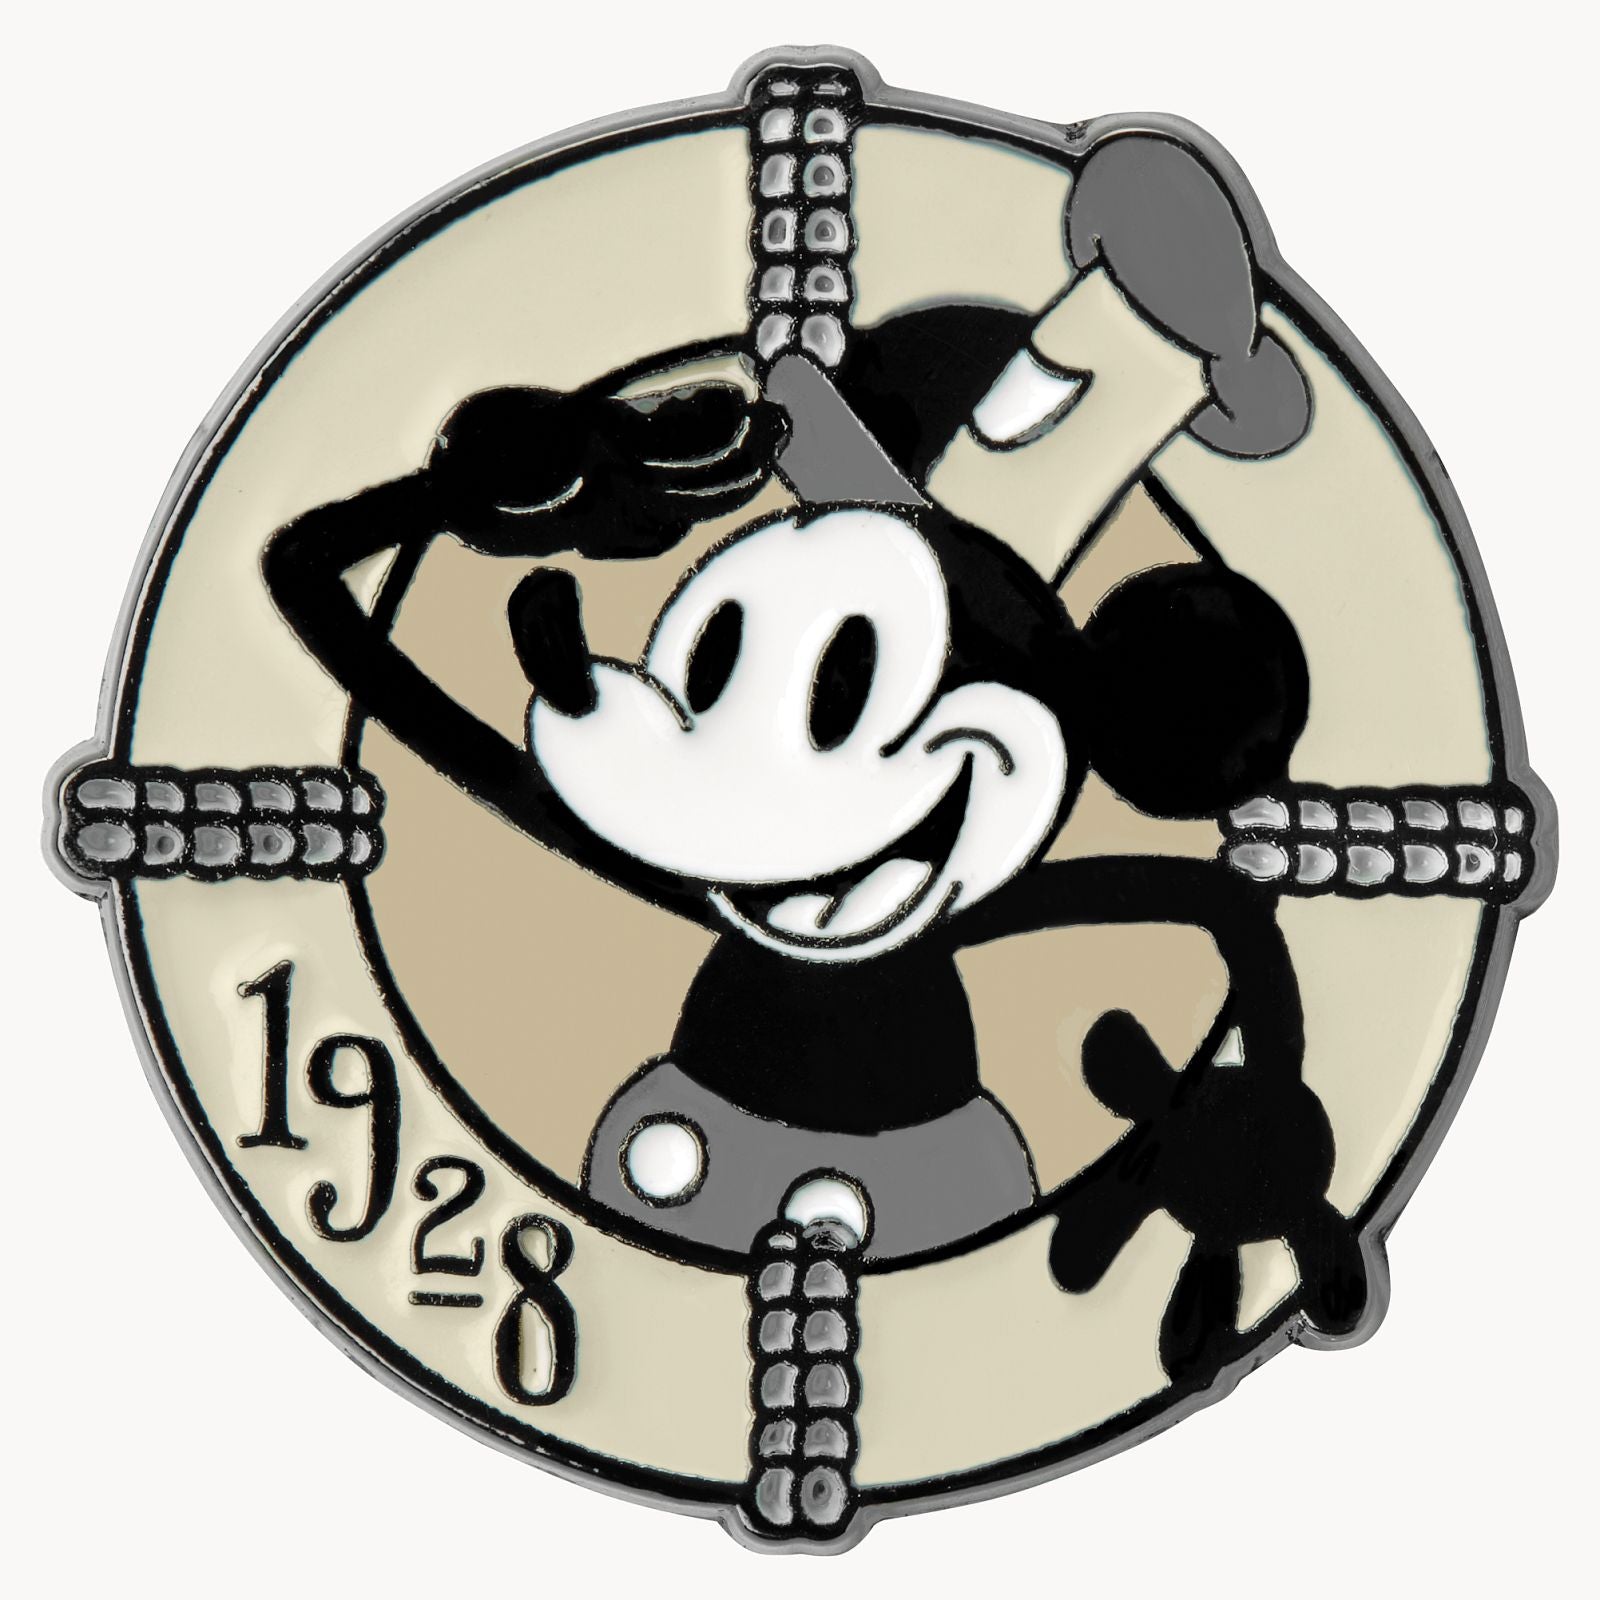 steamboat willie